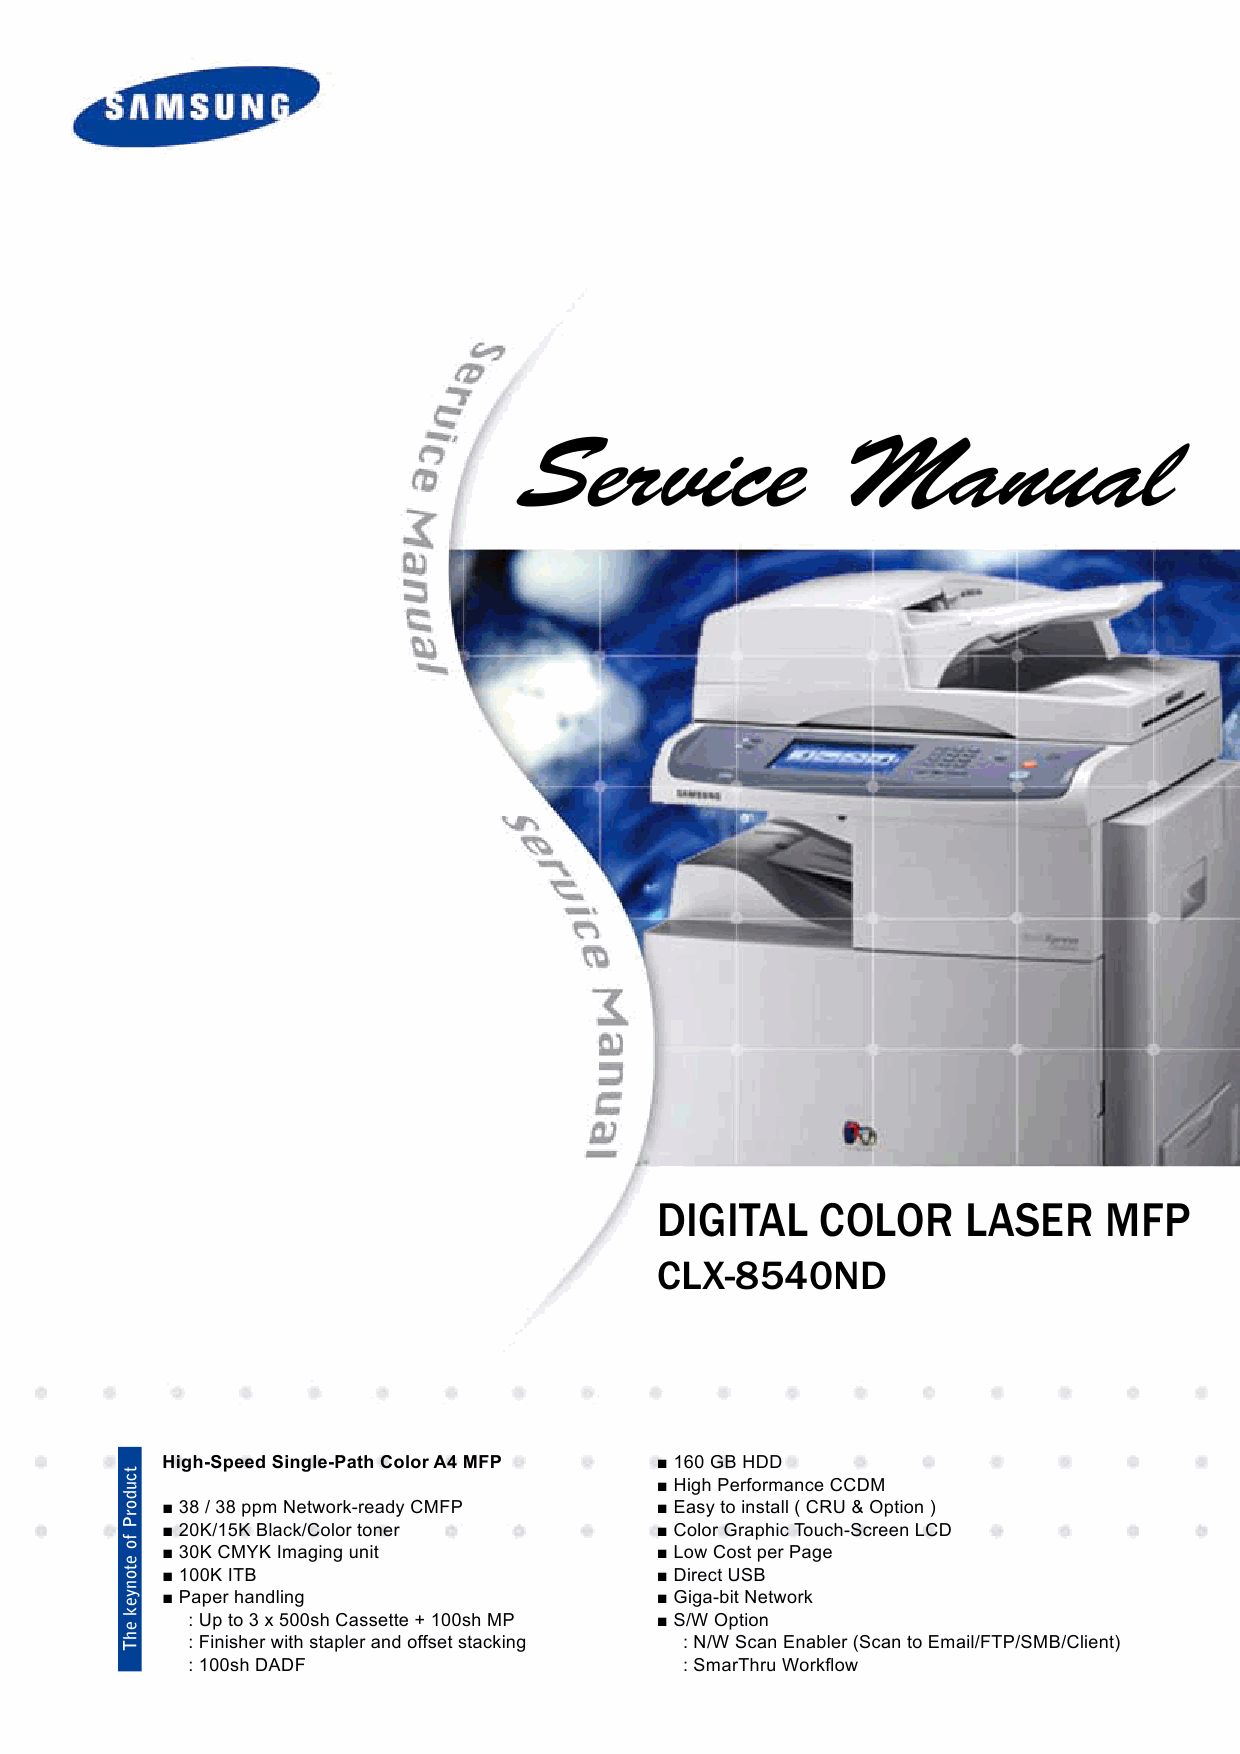 Samsung Digital-Color-Laser-MFP CLX-8540ND Parts and Service Manual-1